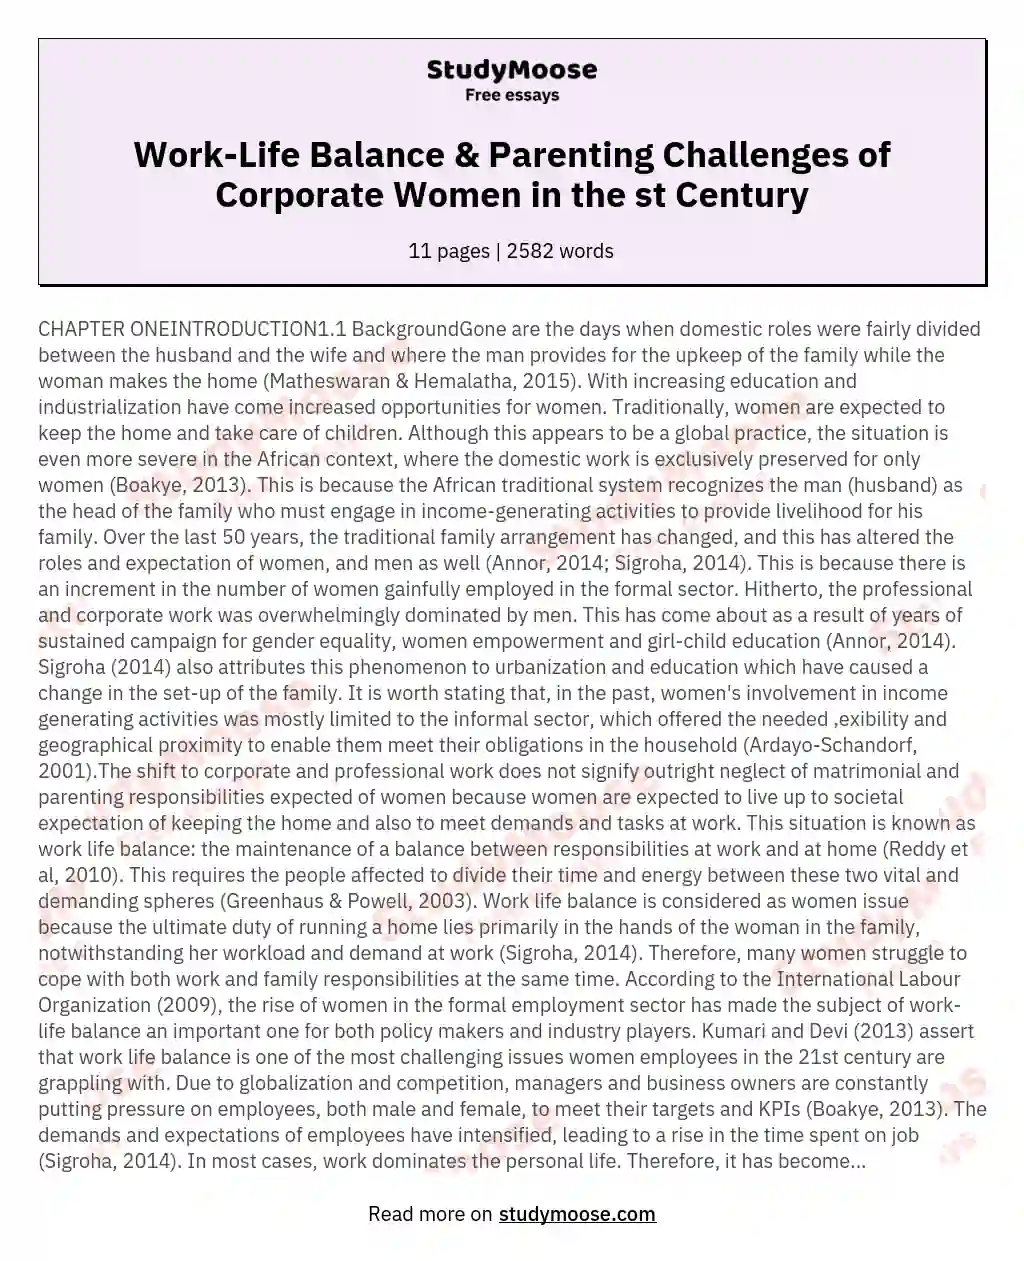 WORK - LIFE BALANCE FOR WORKING WOMEN: A STUDY OF CORPORATE WOMEN PARENTING IN THE 21ST CENTURY